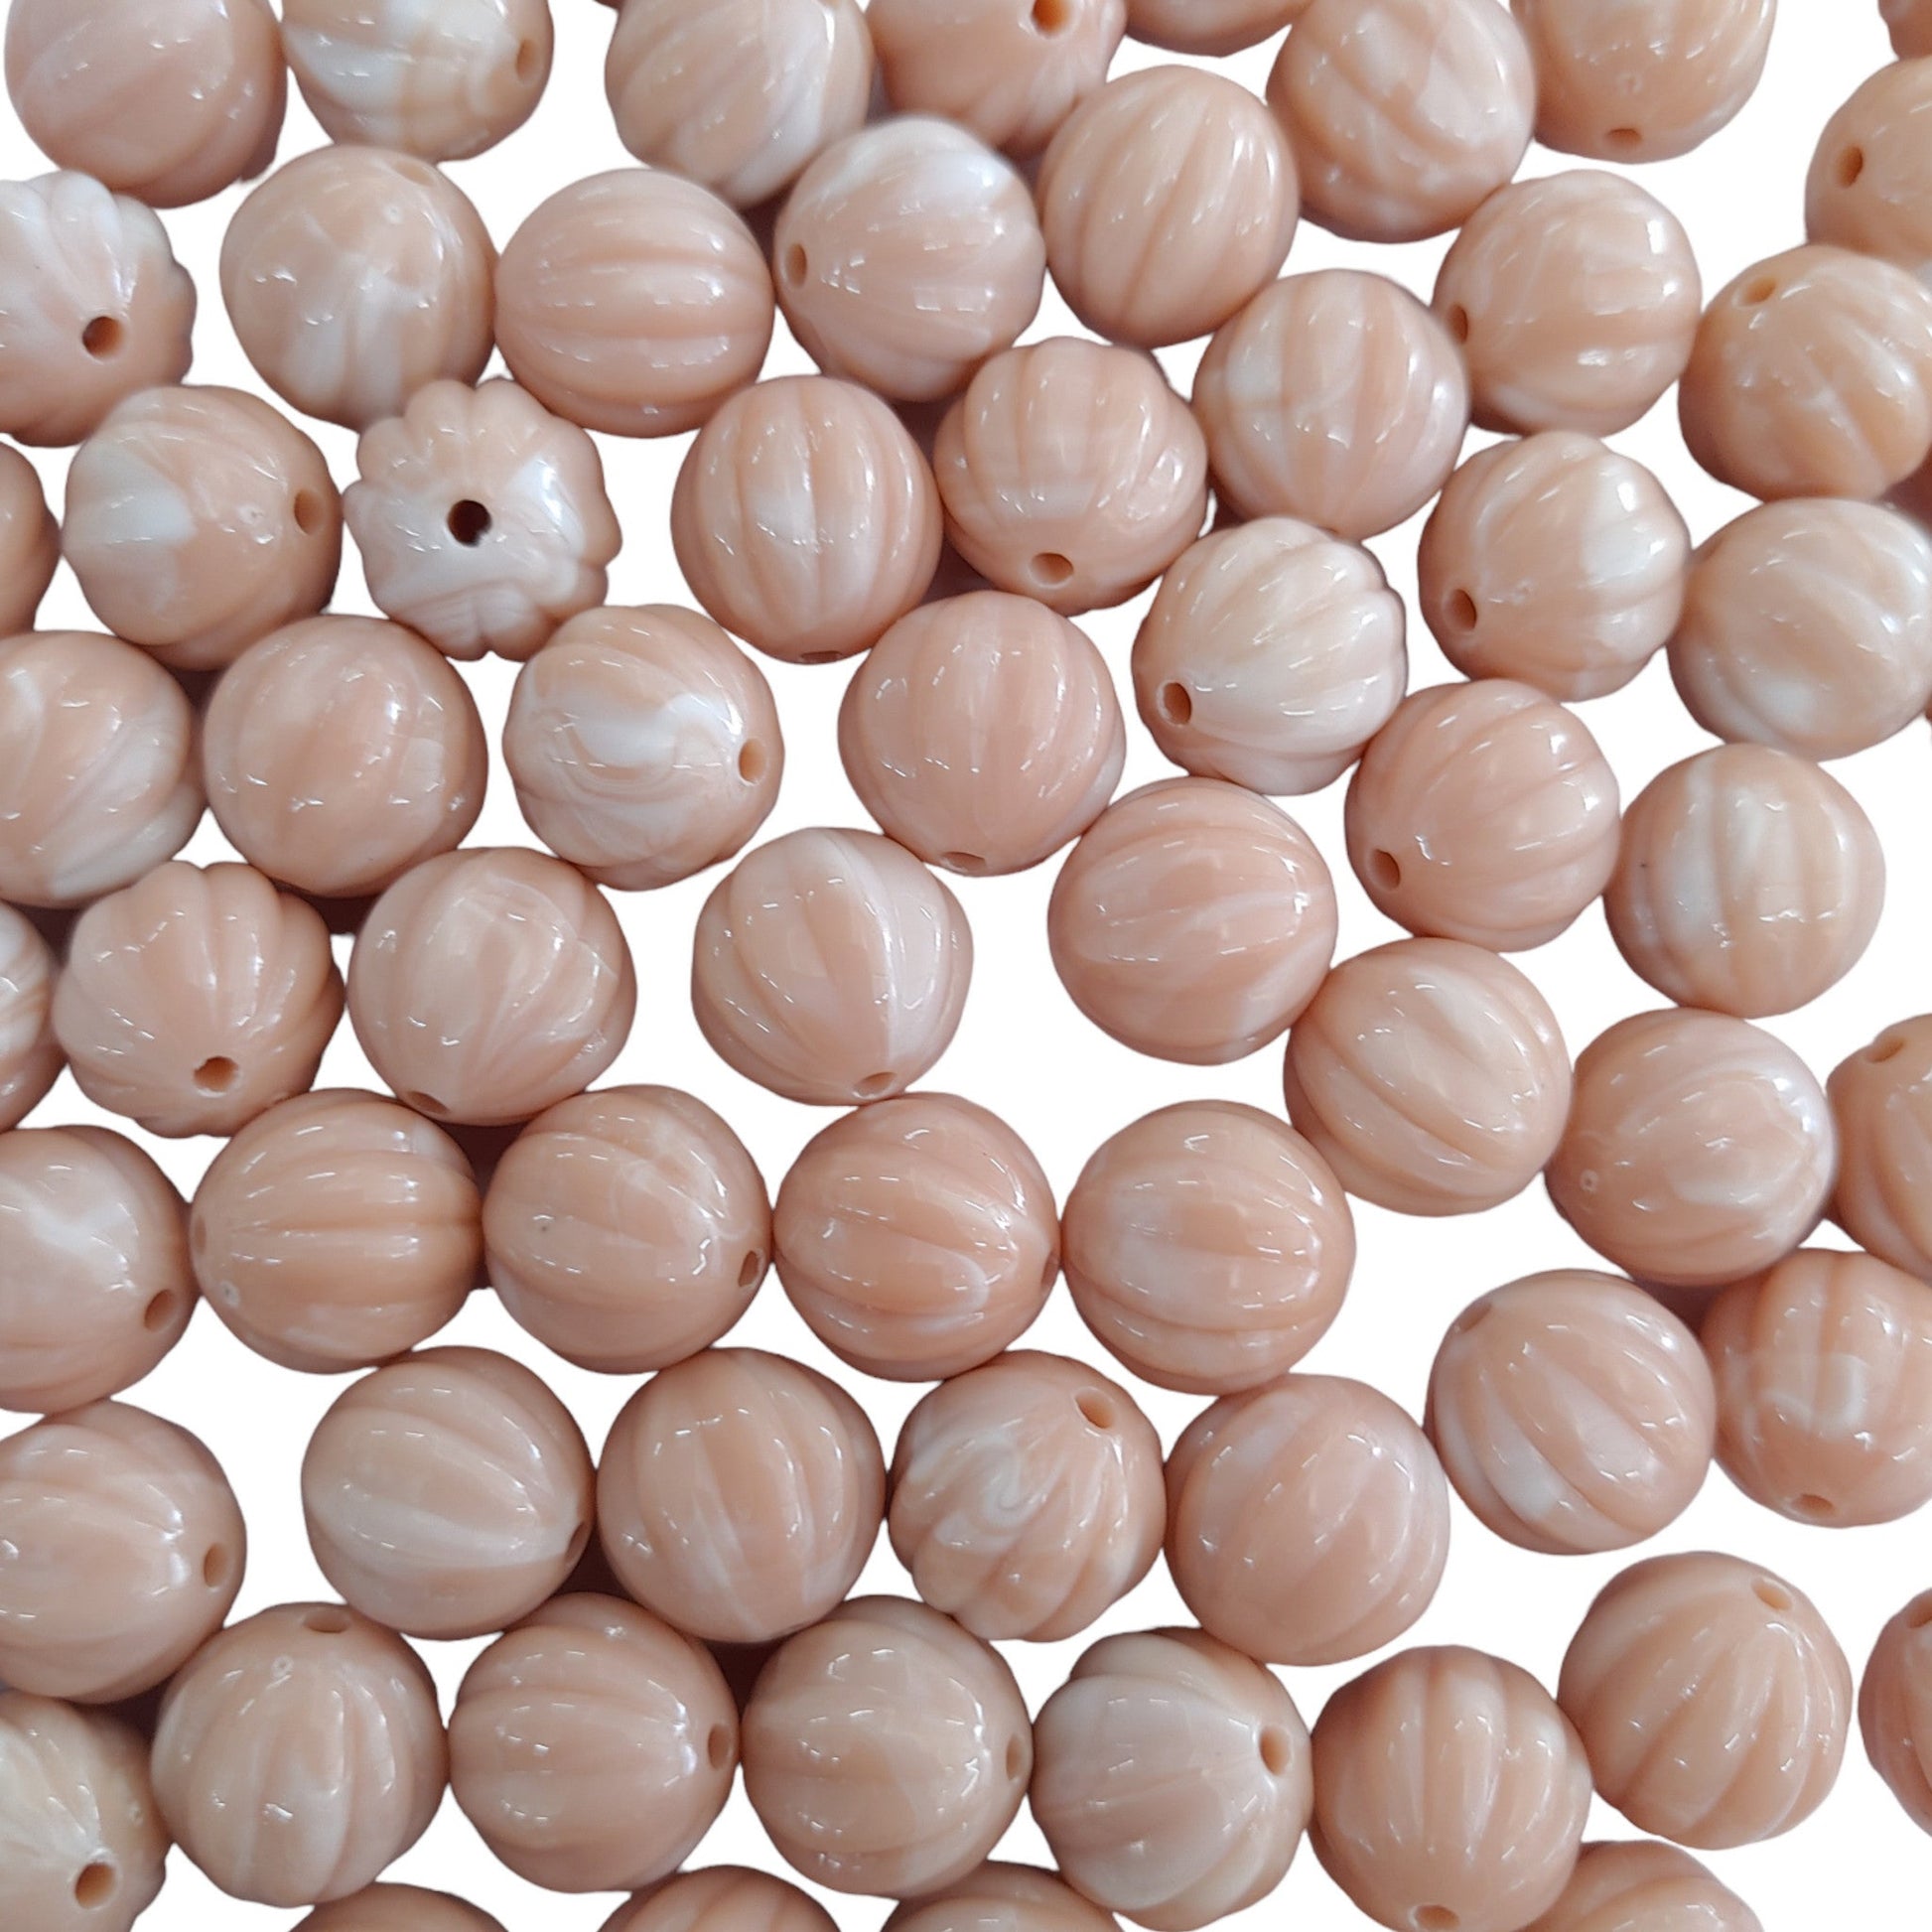 Indian Petals Melon Shaped Color Resin Marble Beads Ideal for Jewelry designing and Craft Making or Decor